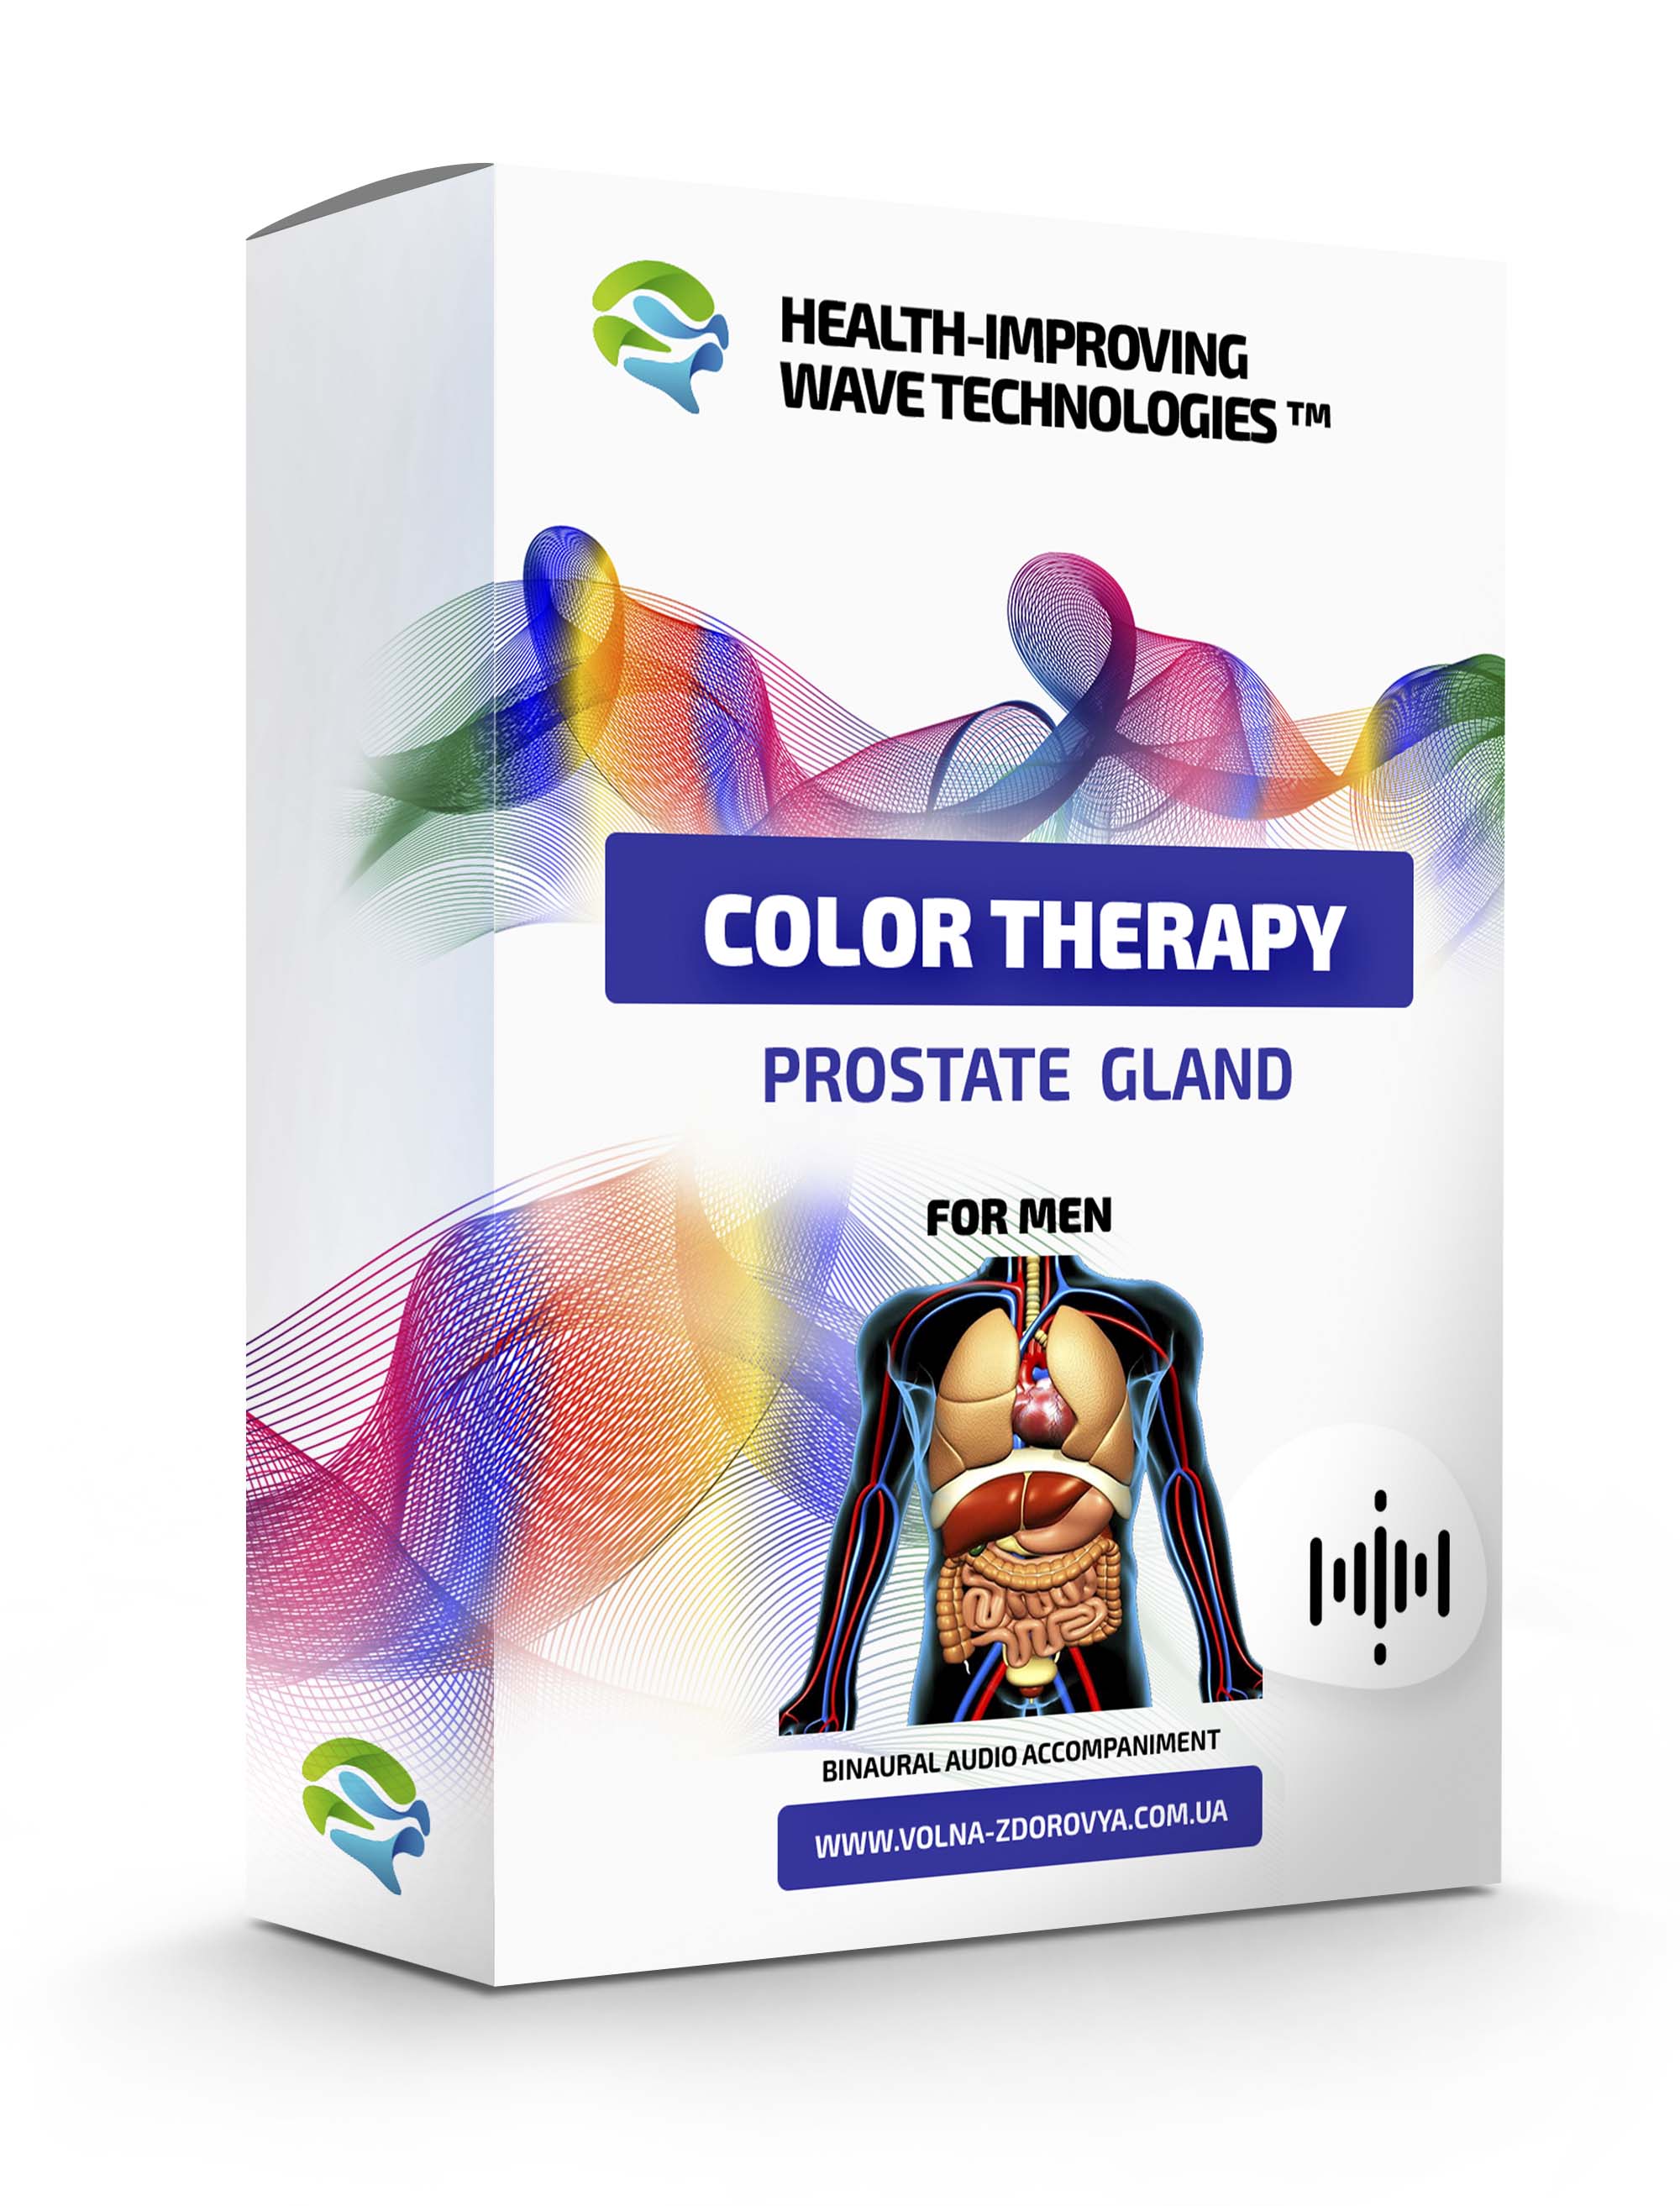 Сolor therapy - Prostate. For men